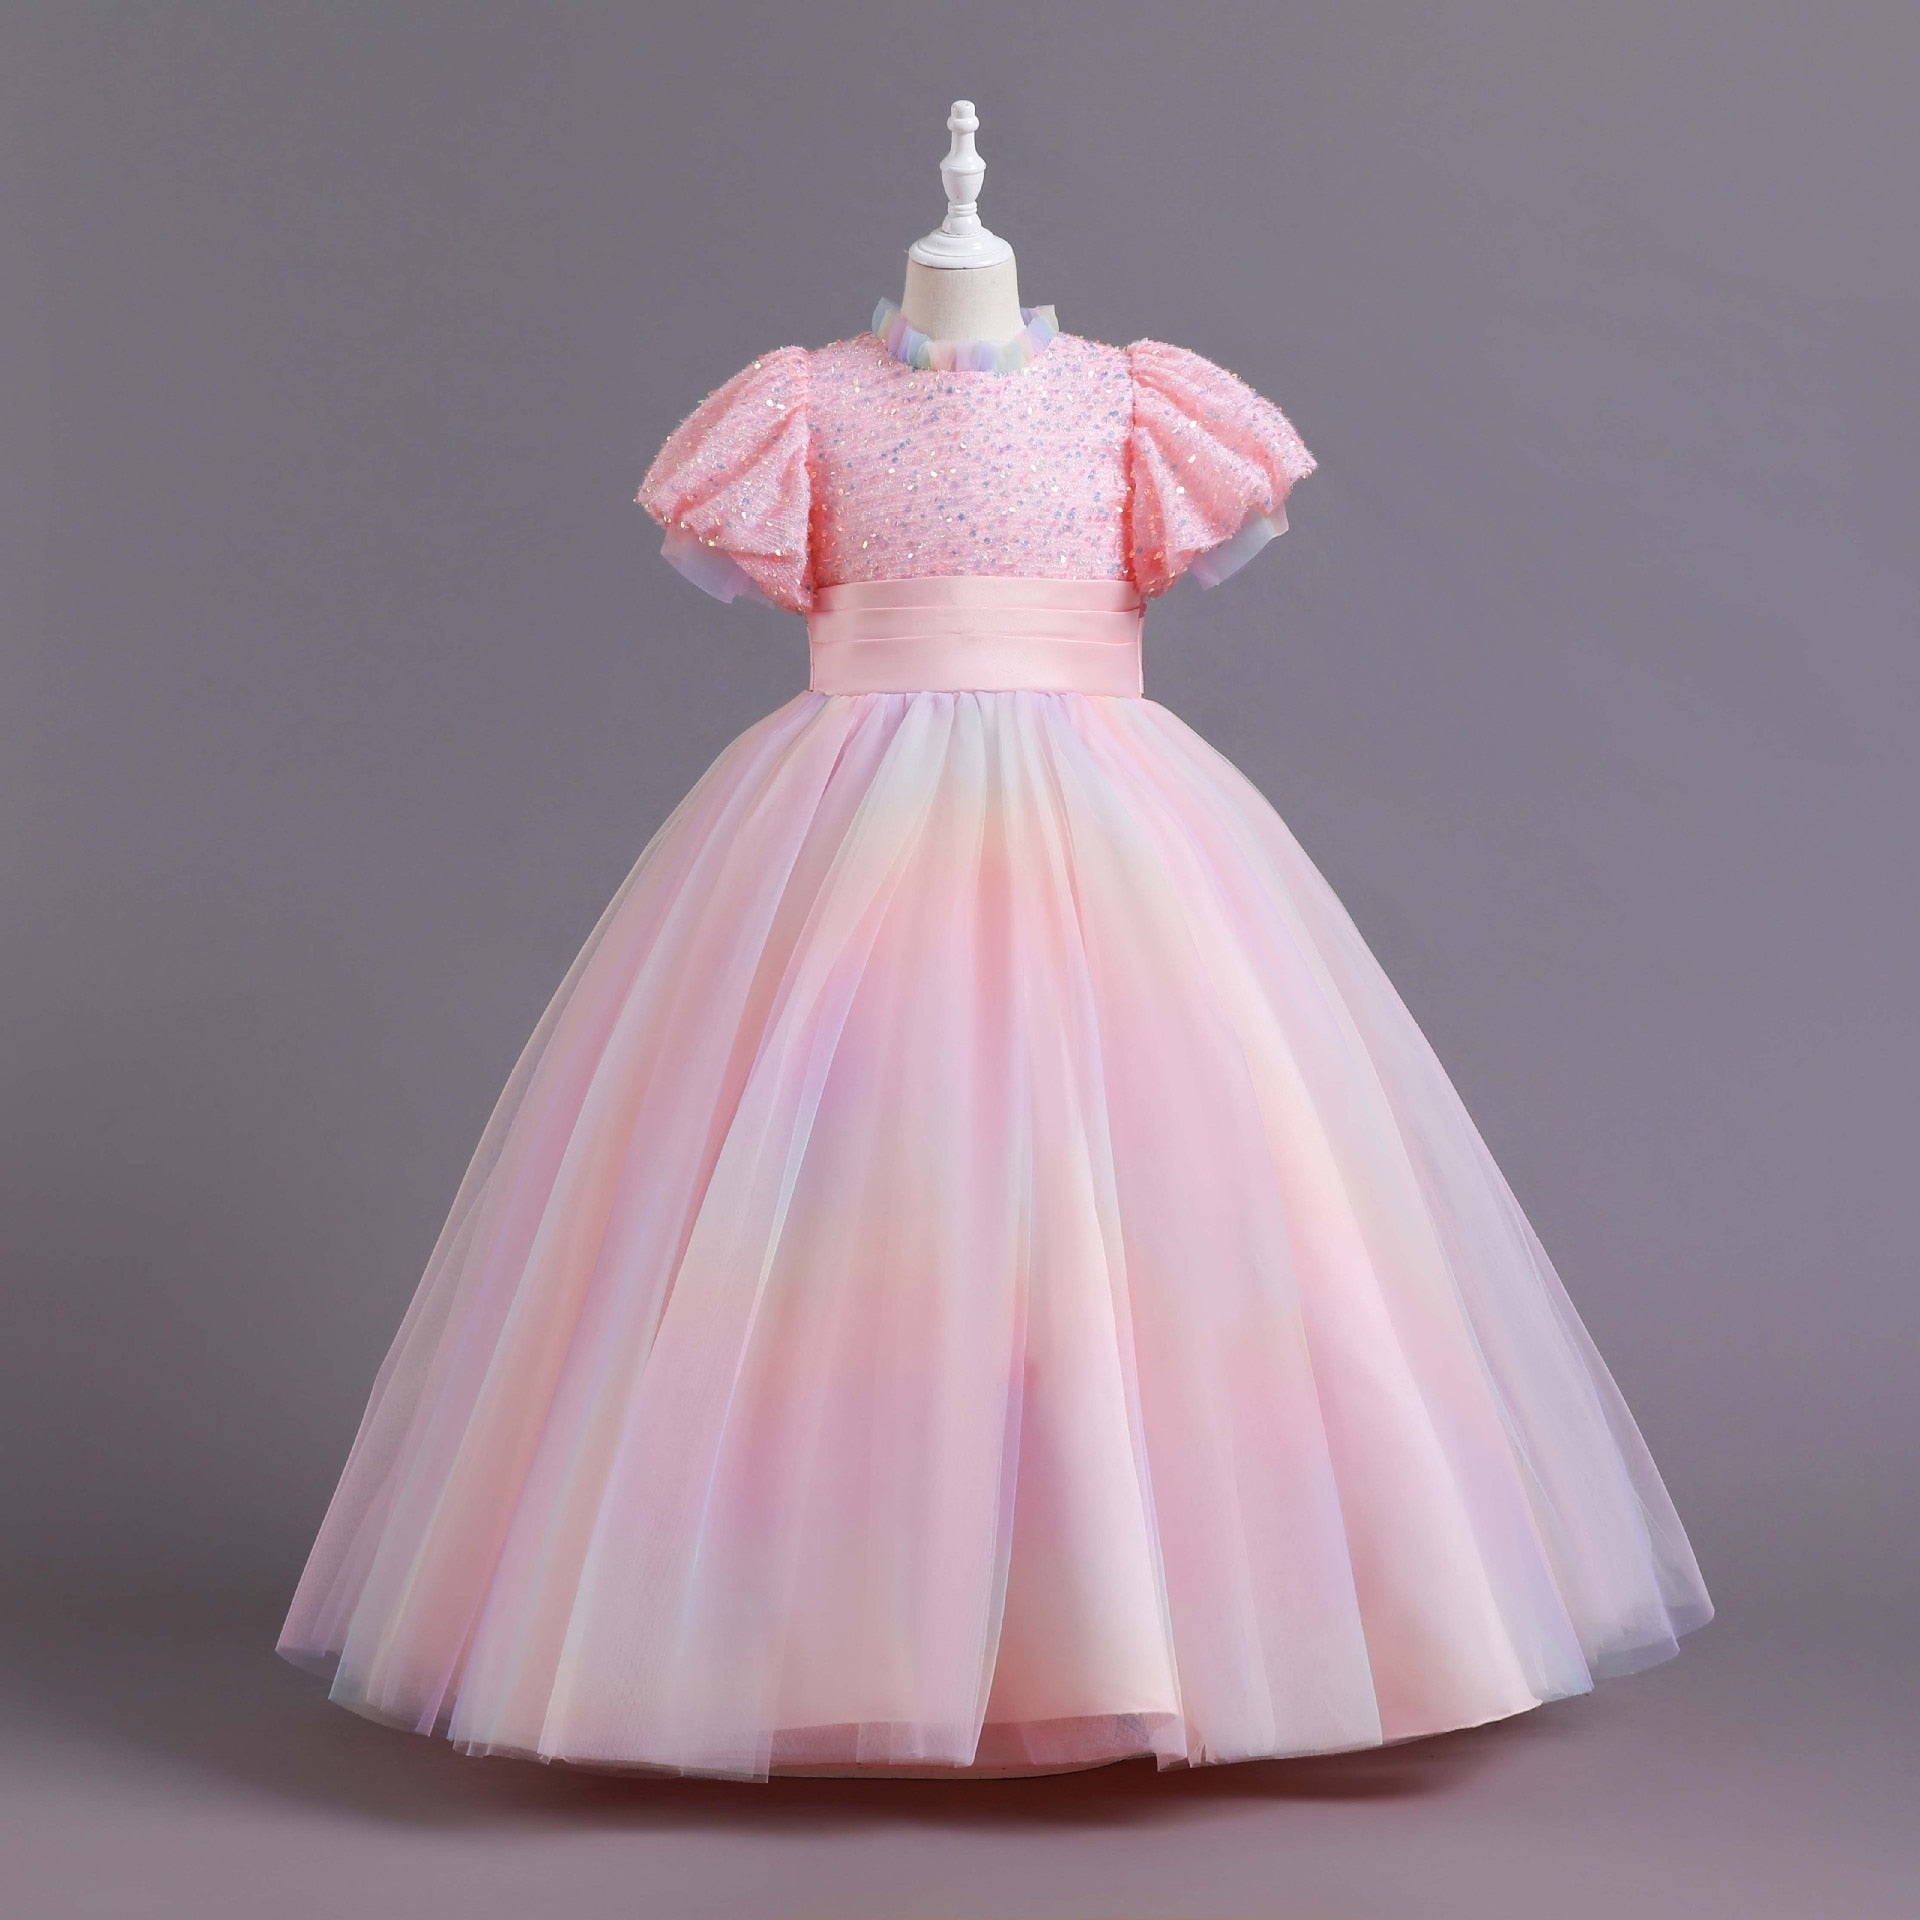 Royal Ball Gown